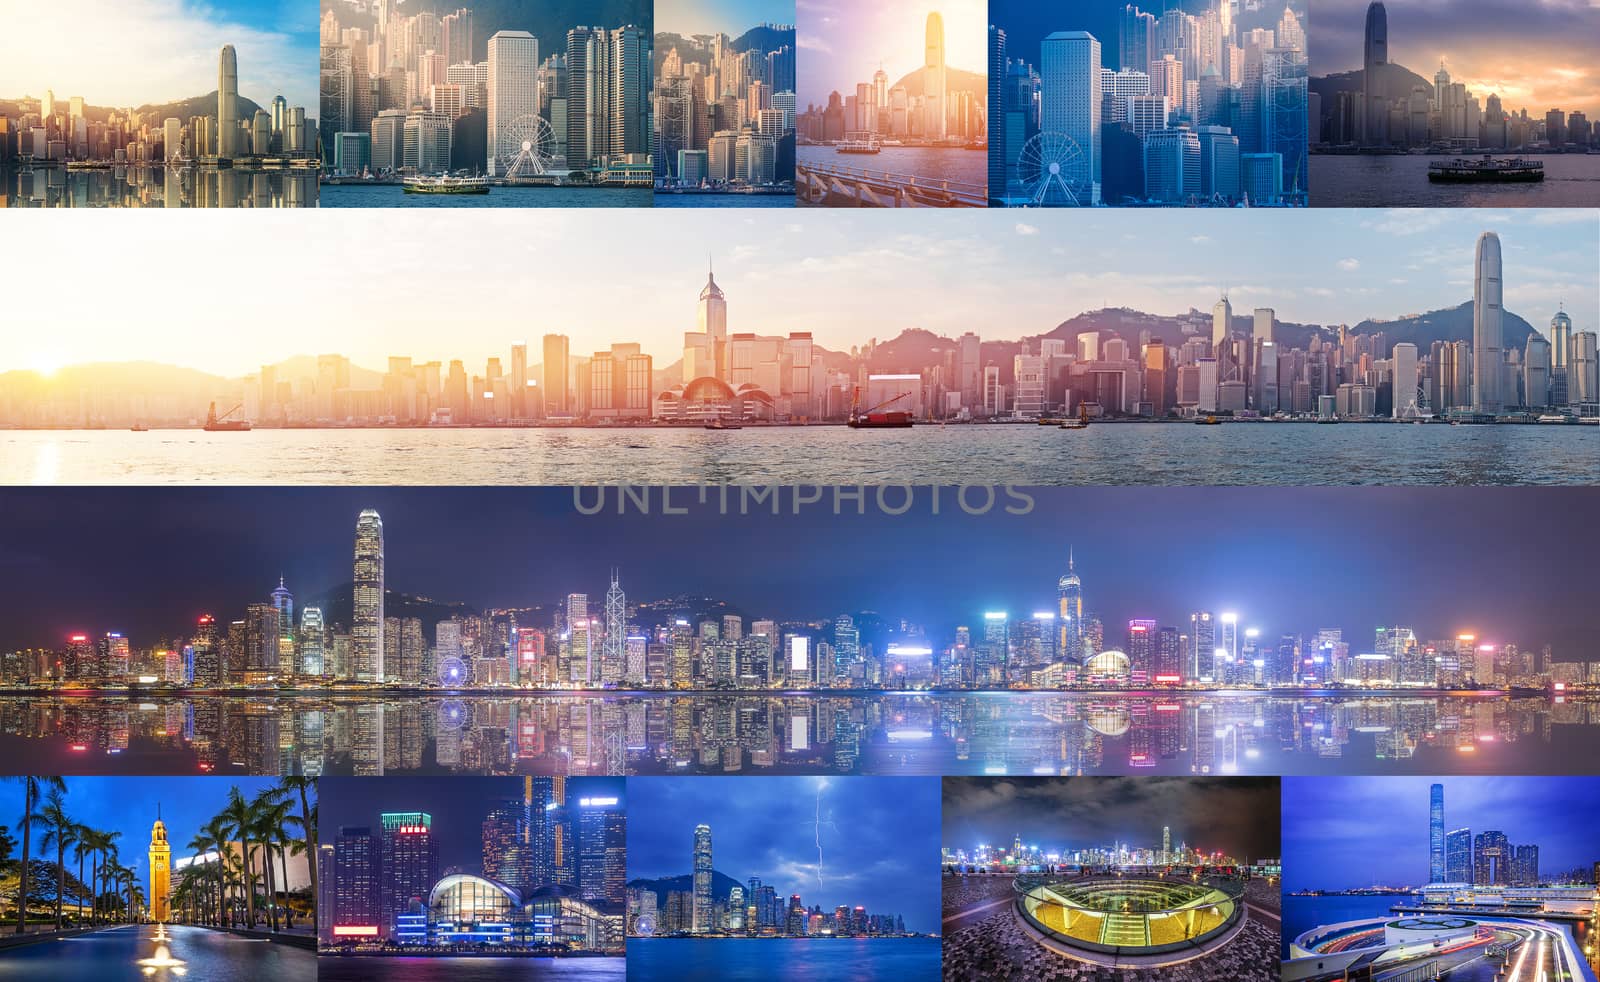 Panoramic views of Victoria Harbour from day to night by Surasak